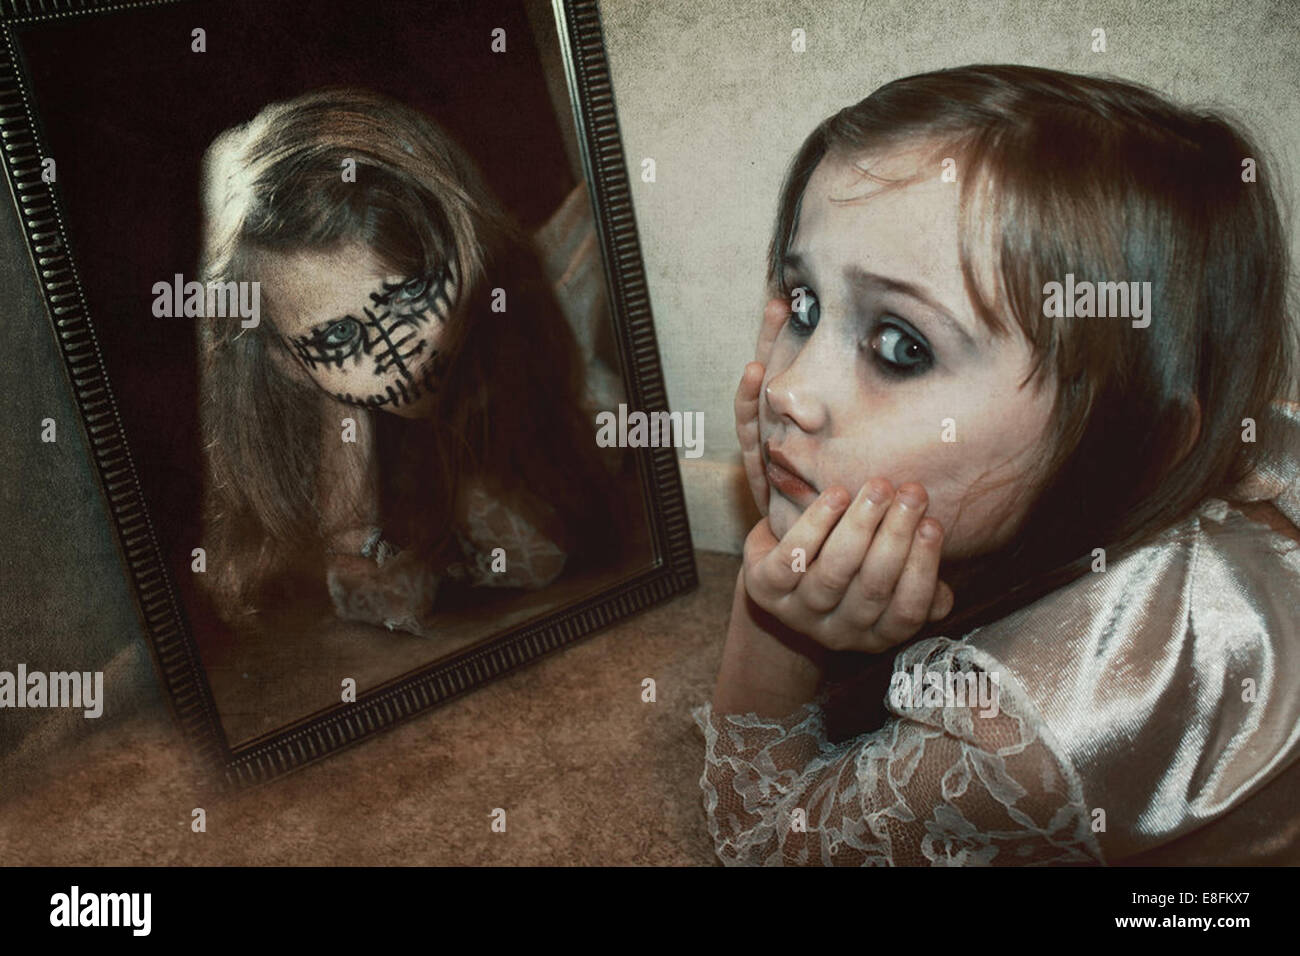 Girl lying on floor with a reflection of her alter ego in mirror Stock Photo